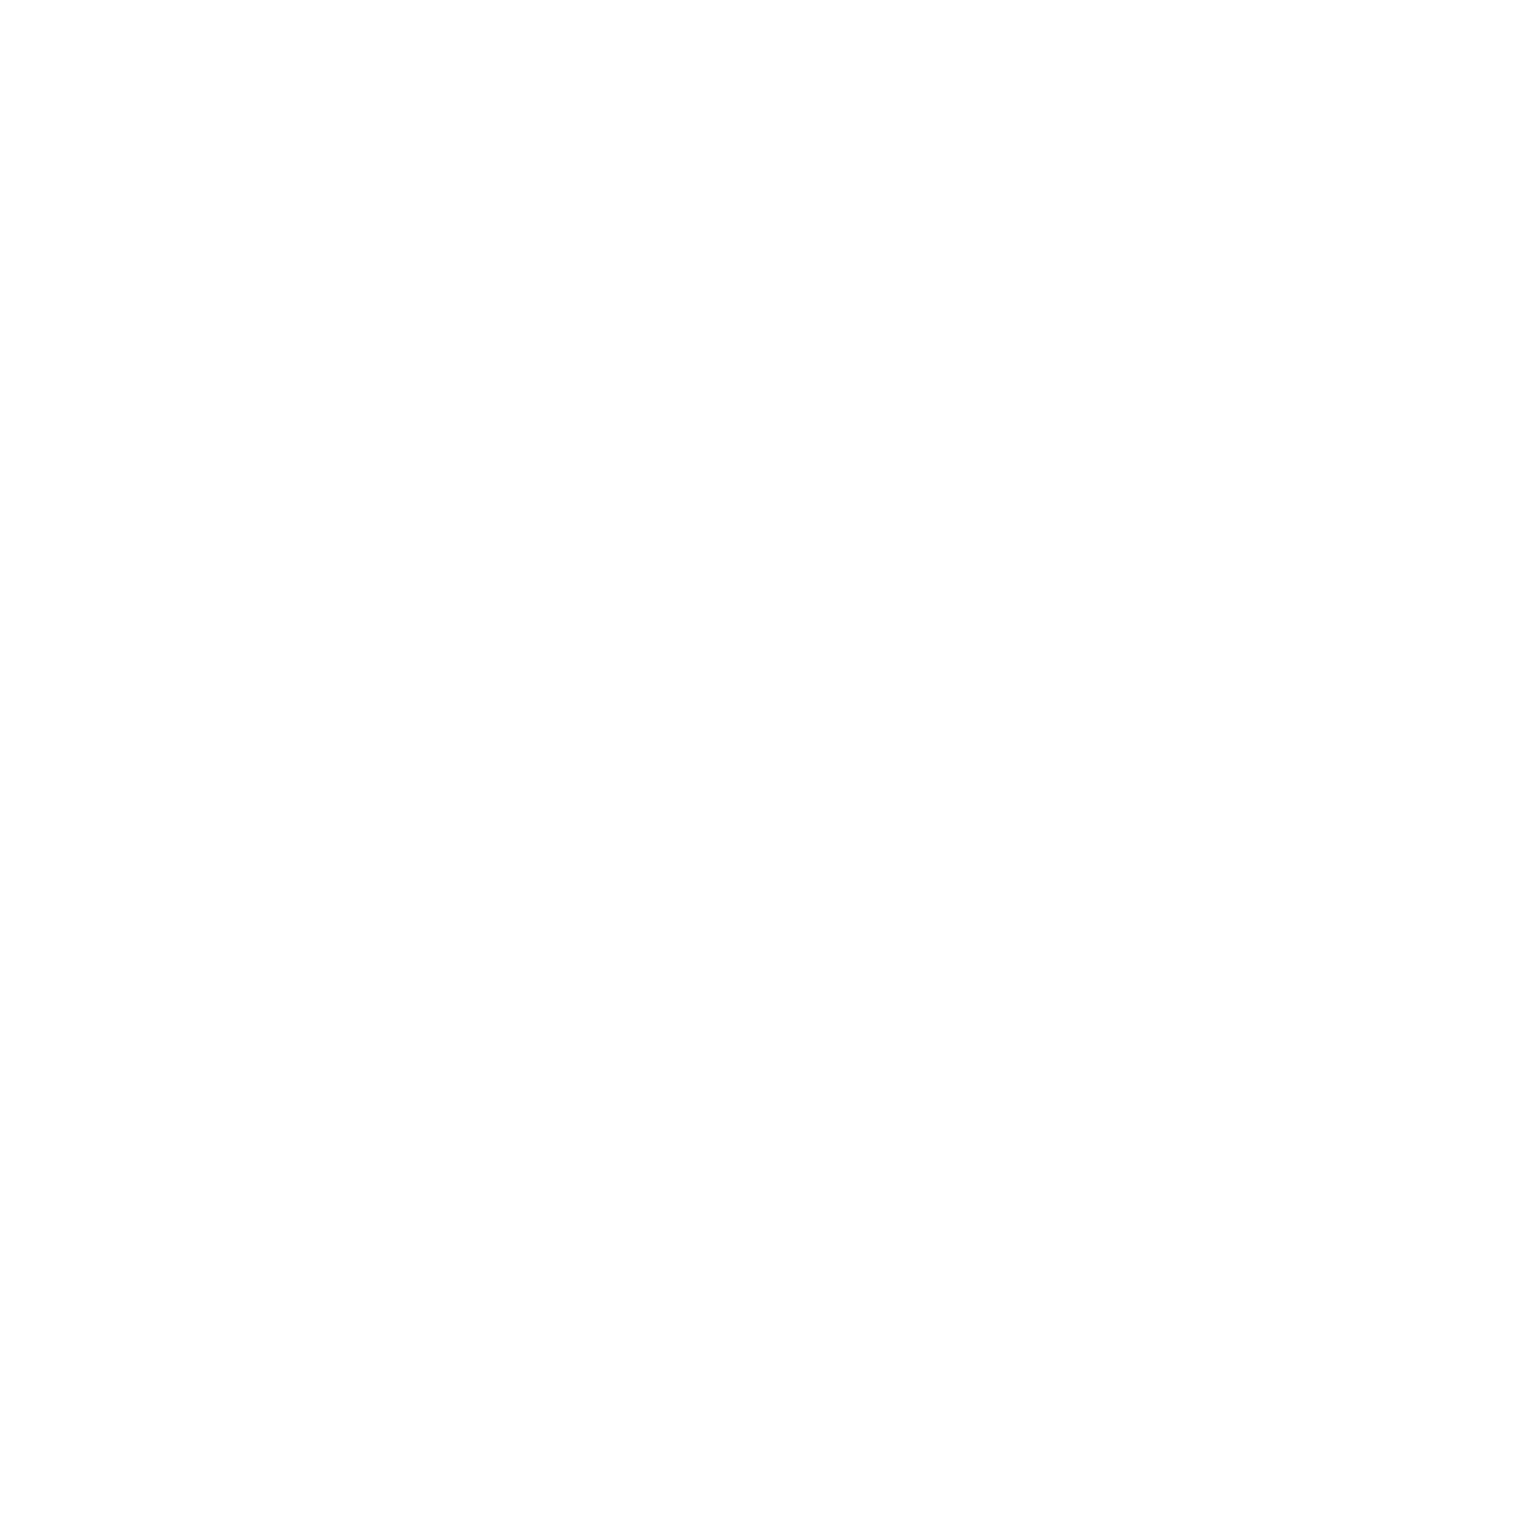 DRUG MEC and TOX in a circle